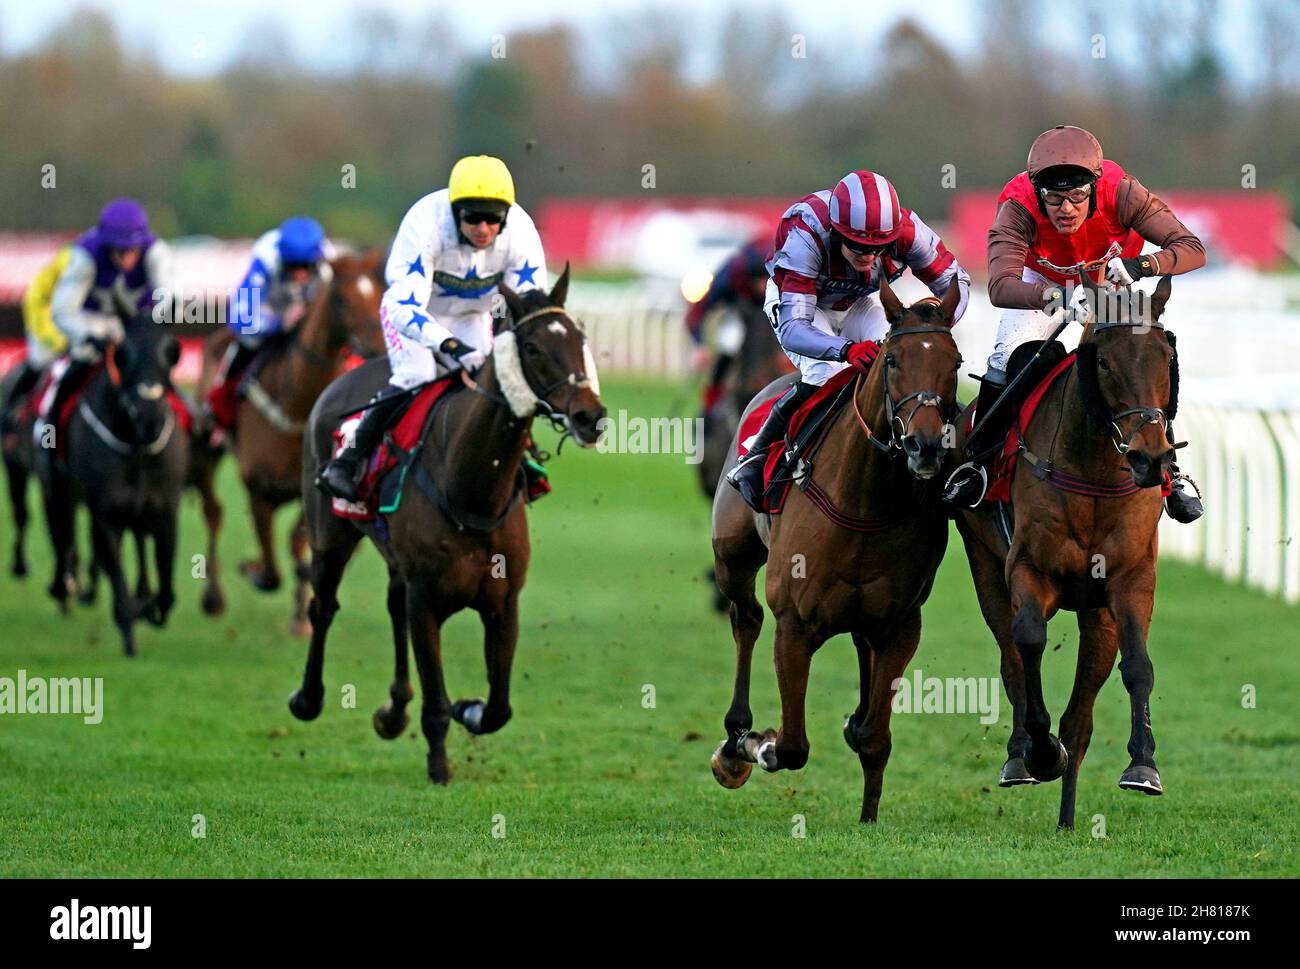 Dolphin Square ridden by jockey David Maxwell (right) on their way to winning the Play Ladbrokes 1-2-Free On Football Handicap Hurdle with Flemcara ridden by jockey Thomas Bellamy (second right) second and Eyeofthescorpion ridden by jockey Paddy Brennan third at Newbury Racecourse. Picture date: Friday November 26, 2021. See PA story RACING Newbury. Photo credit should read: Adam Davy/PA Wire. RESTRICTIONS: Use subject to restrictions. Editorial use only, no commercial use without prior consent from rights holder. Stock Photo